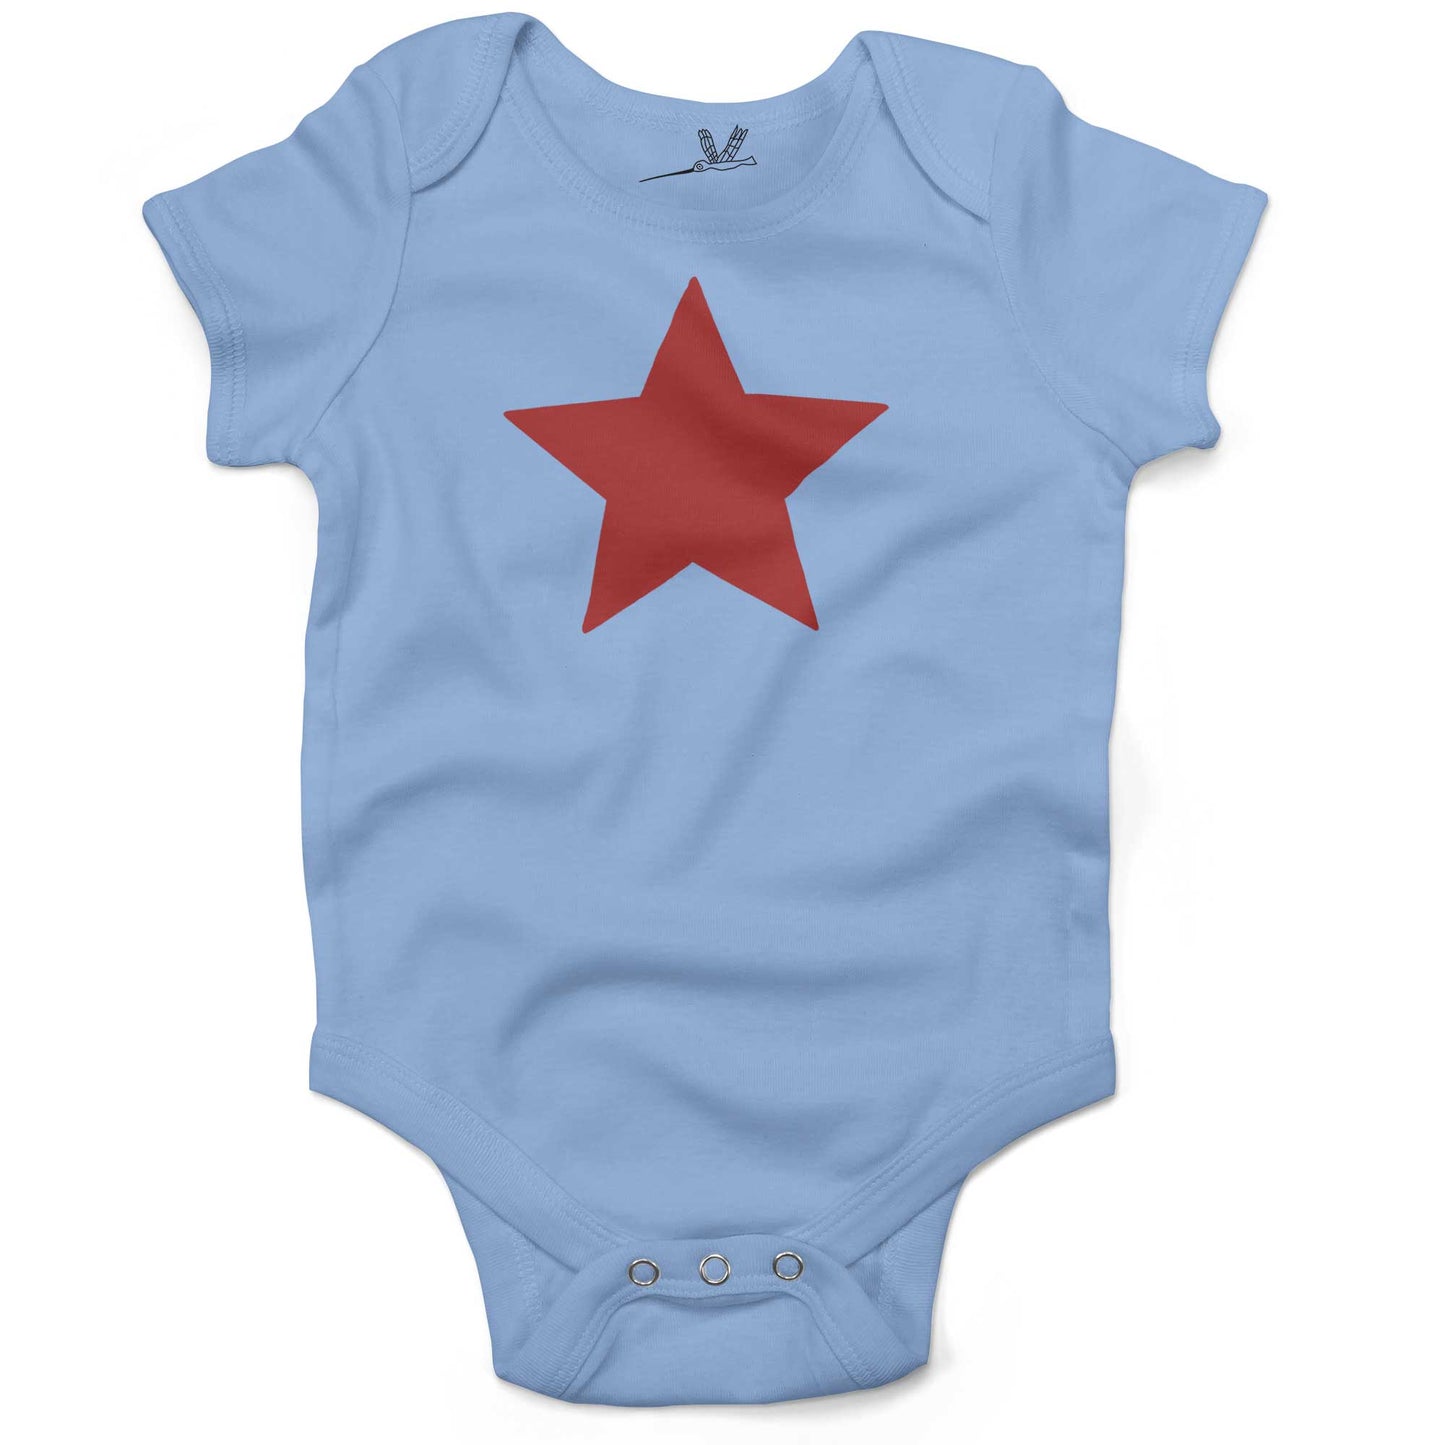 Five Point Star Infant Bodysuit-Organic Baby Blue-Red Star